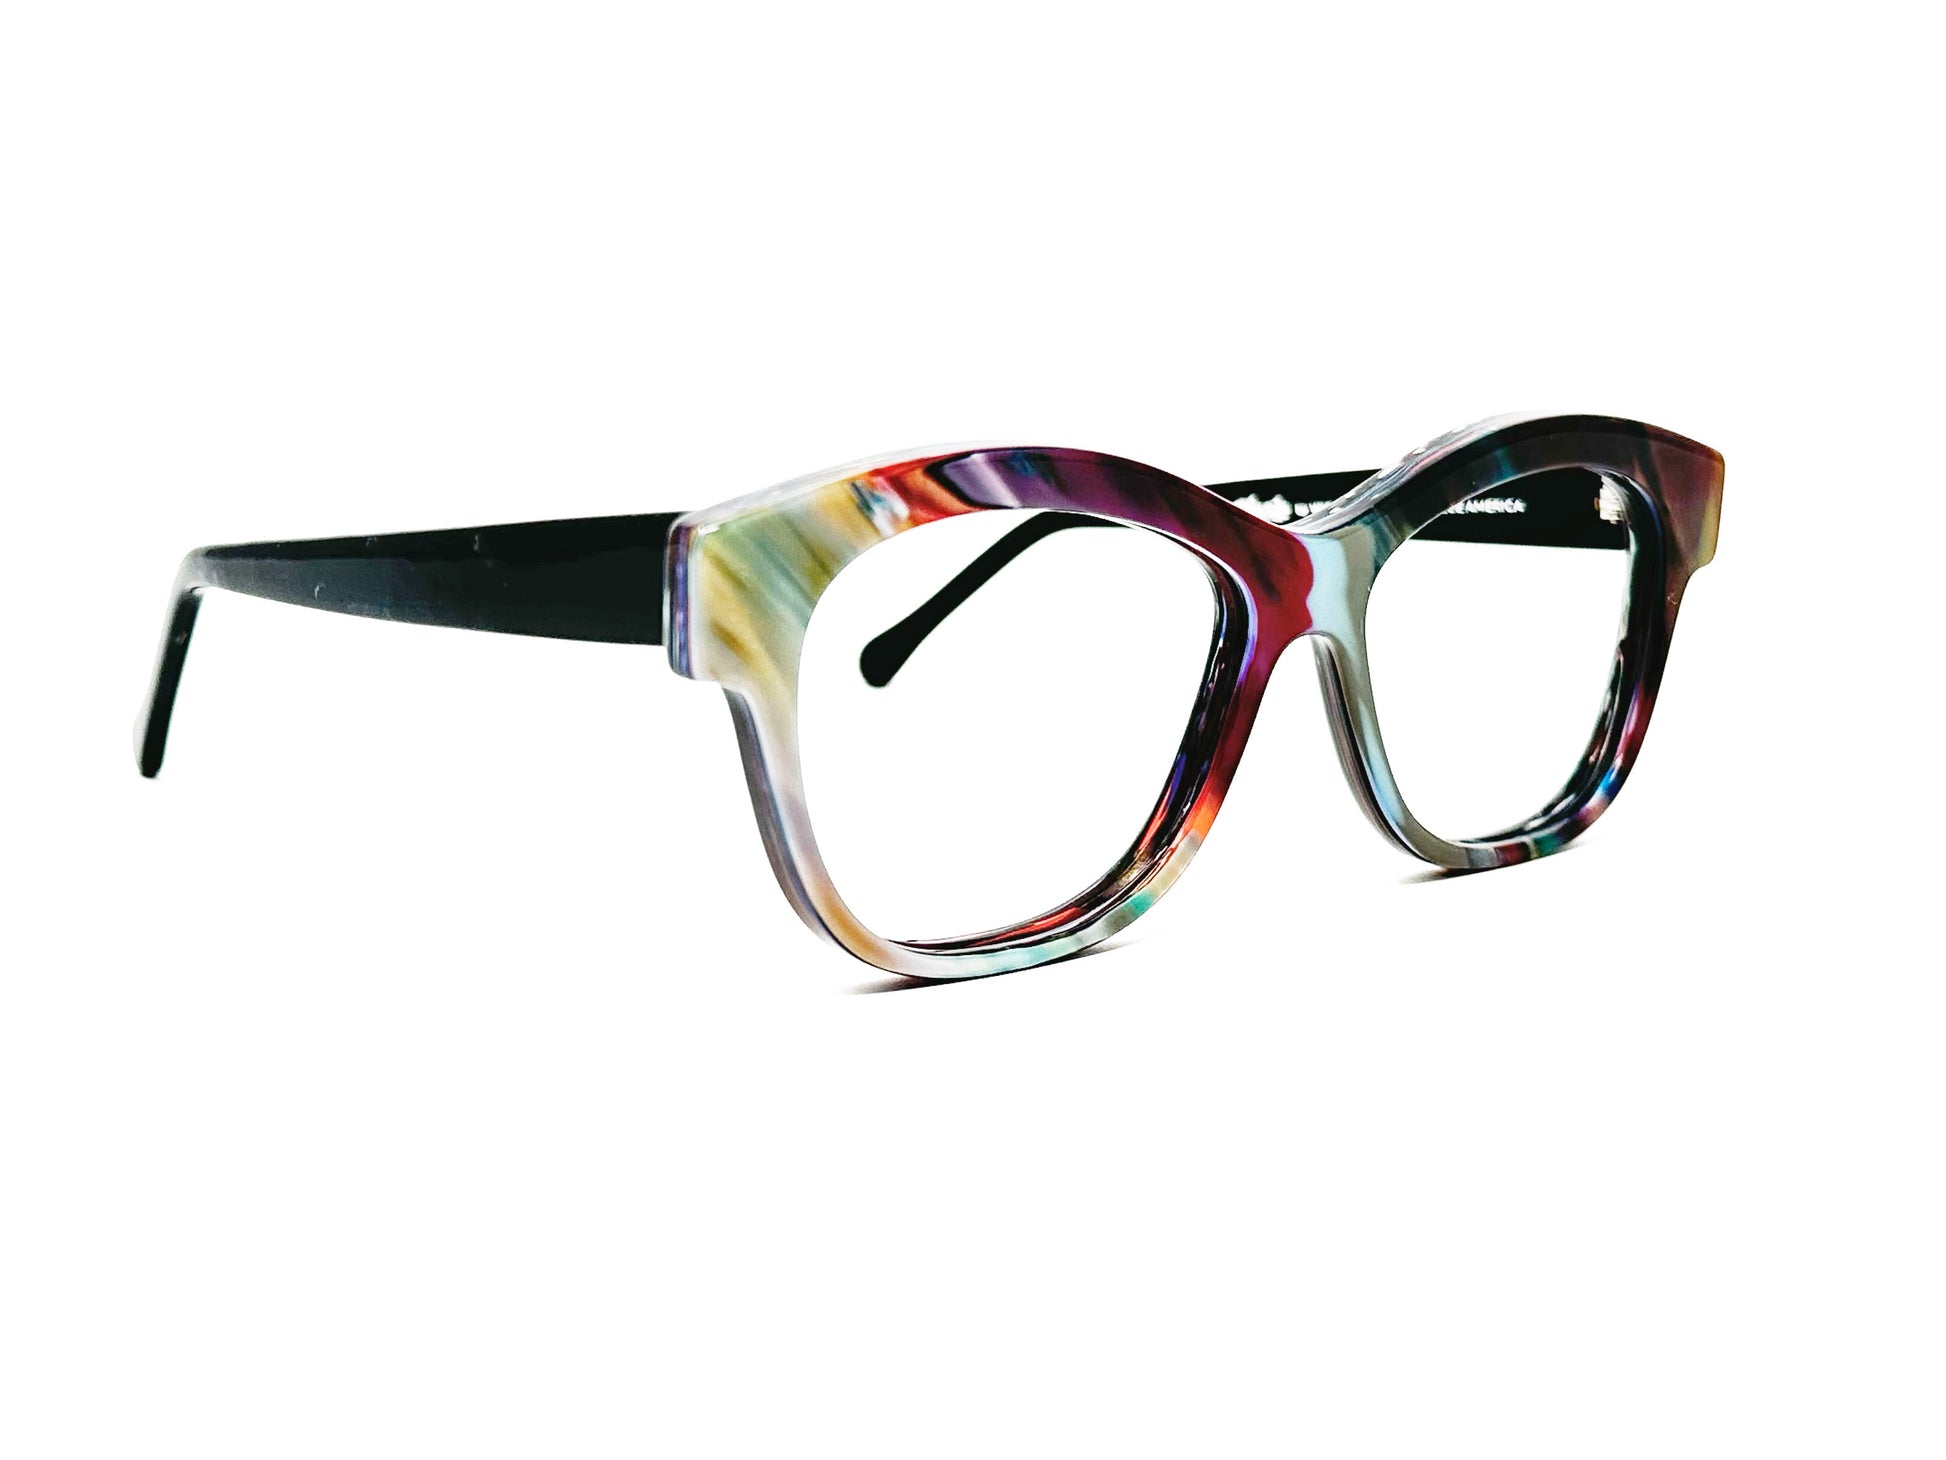 Viktlos recycled acetate optical frame. Square shaped with soft, lifted angles and v-curve on top of frame. Model: RC013. Color: 2638 - Cool toned multi-color. Side view.